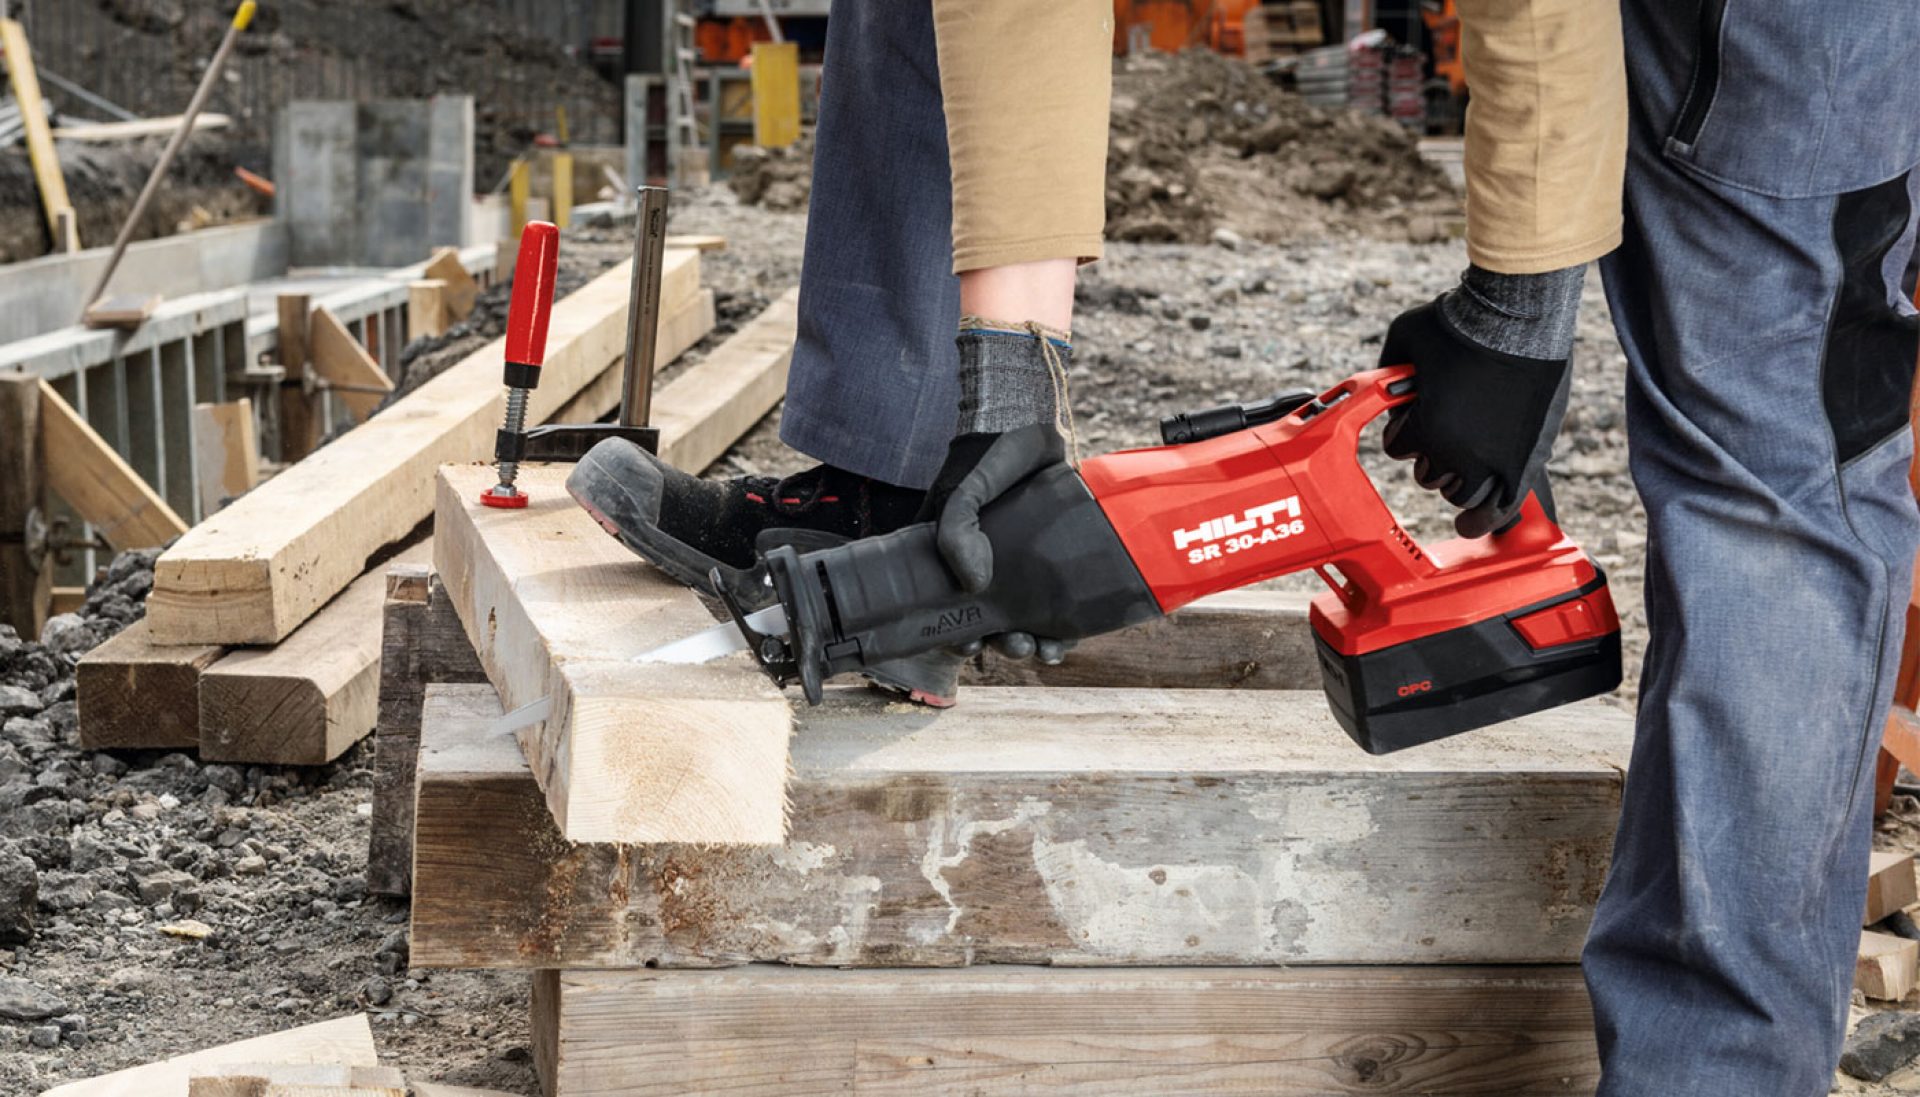 Introducing the SR 30-A36 Cordless Reciprocating saw for demolition